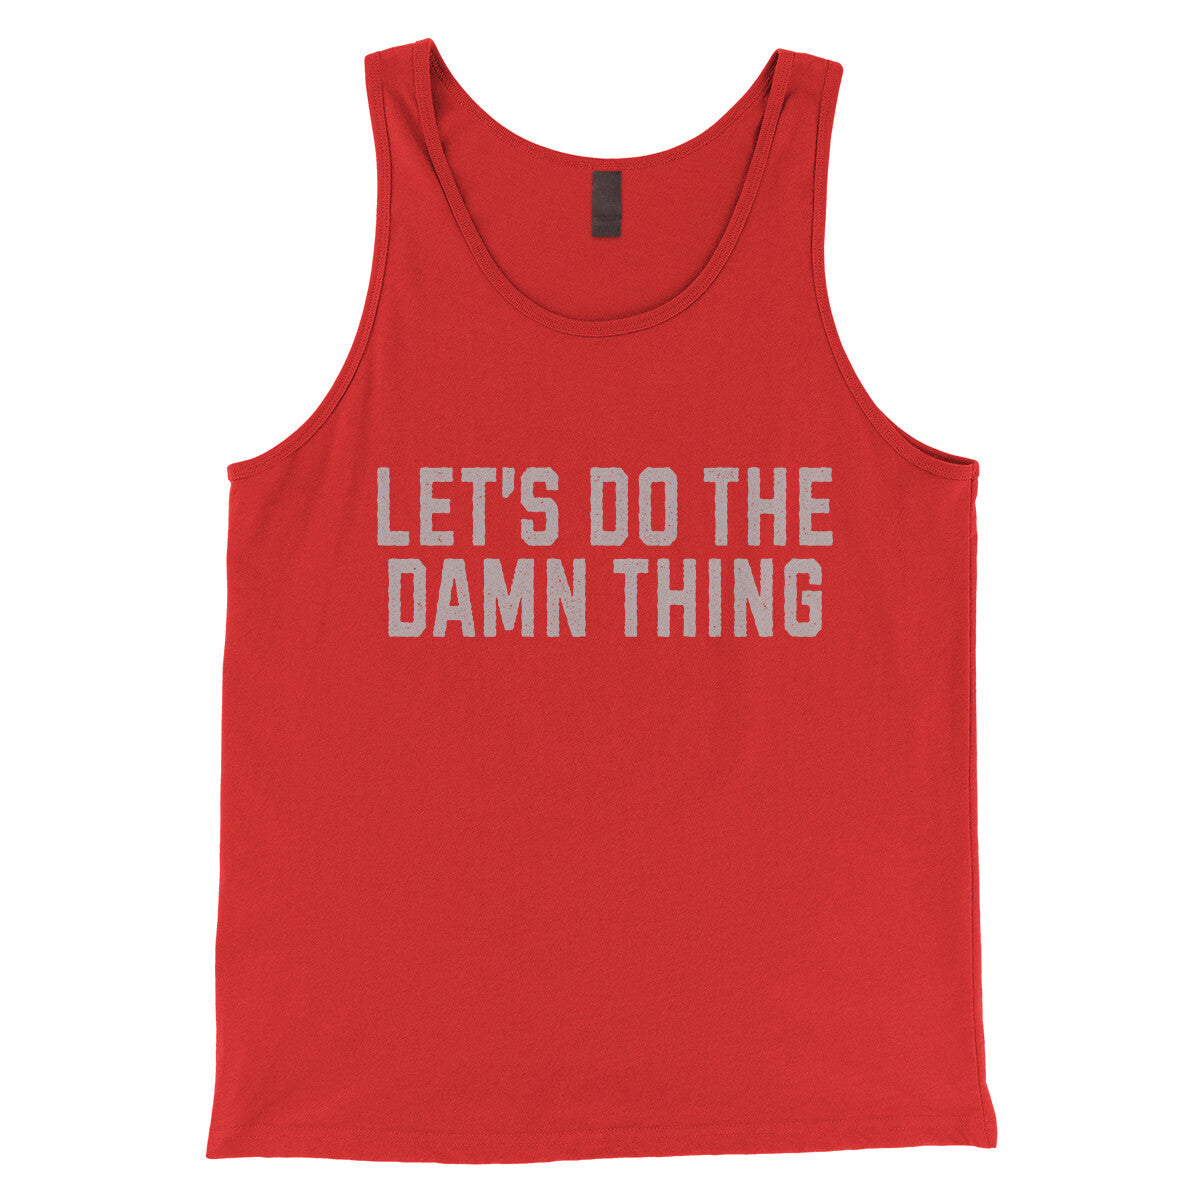 Let’s Do the Damn Thing in Red Color